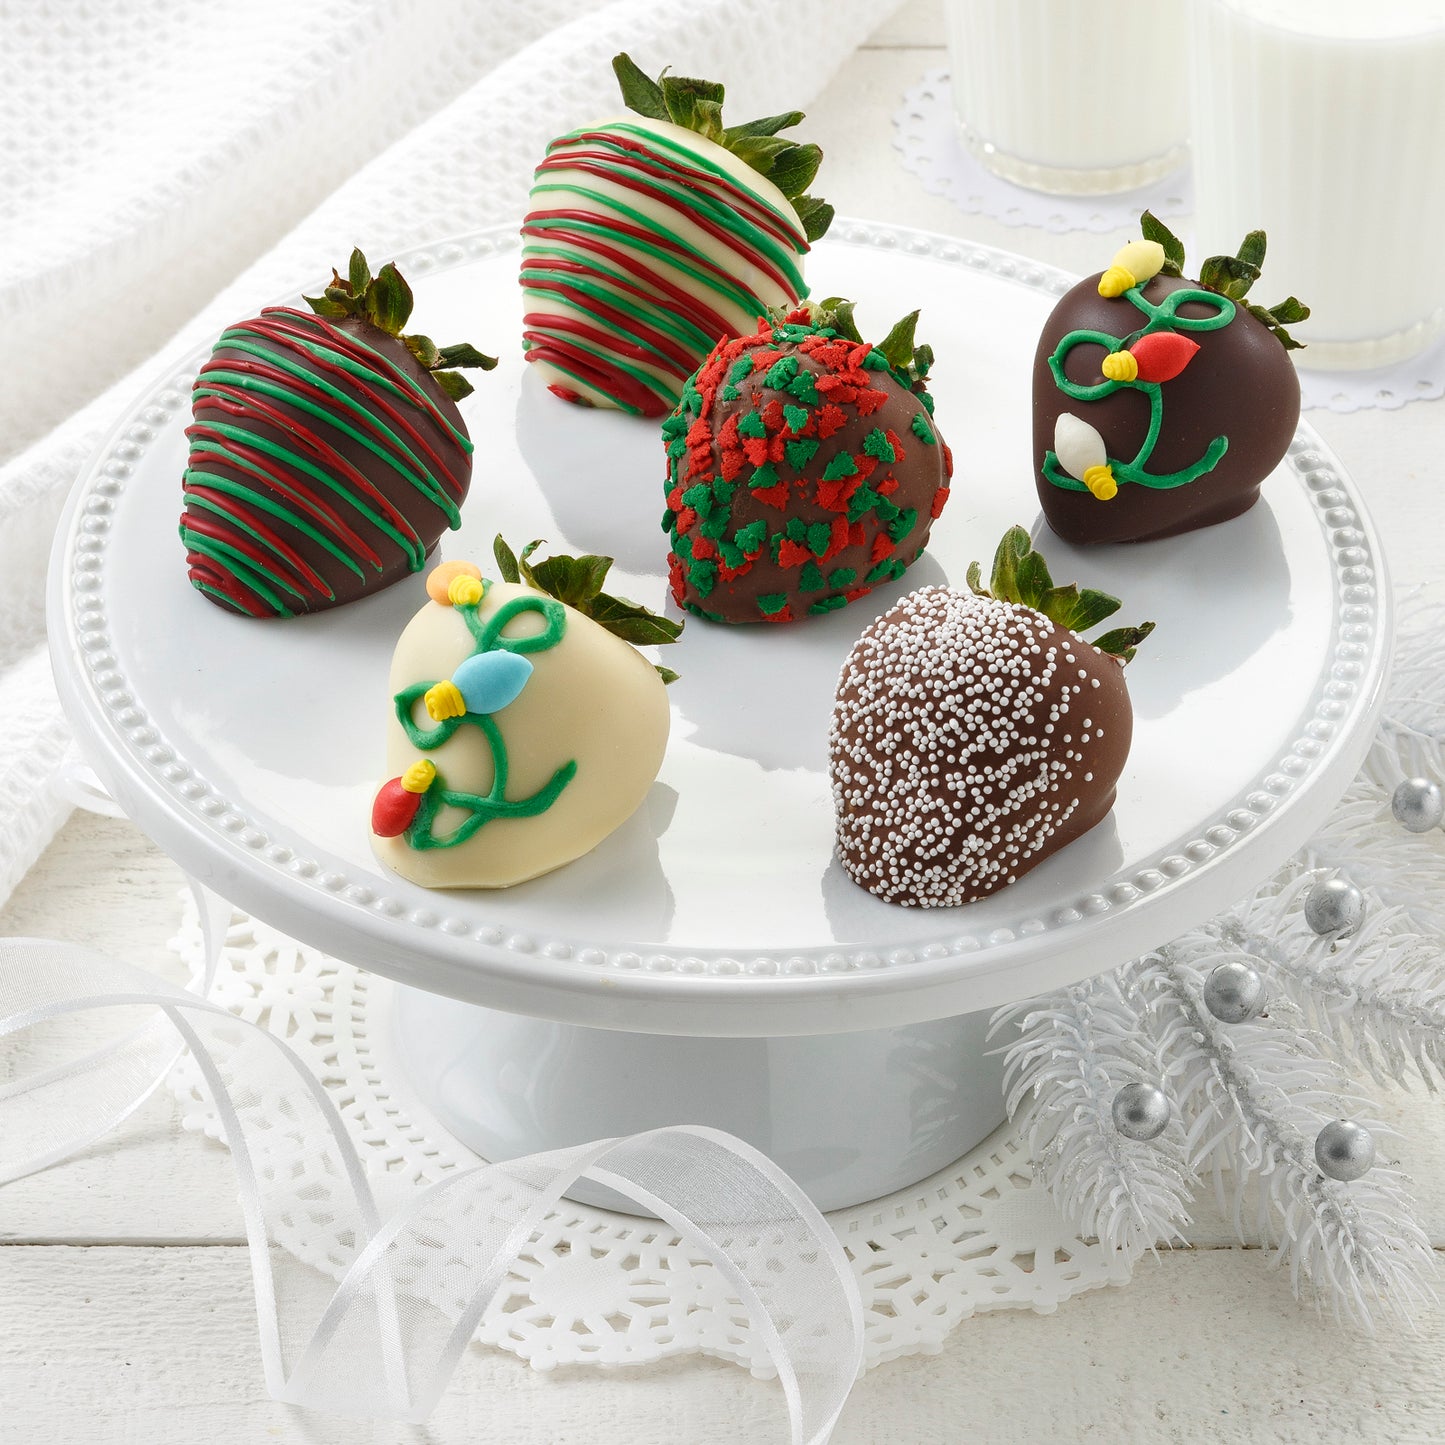 Six chocolate-covered strawberries decorated in a holiday theme